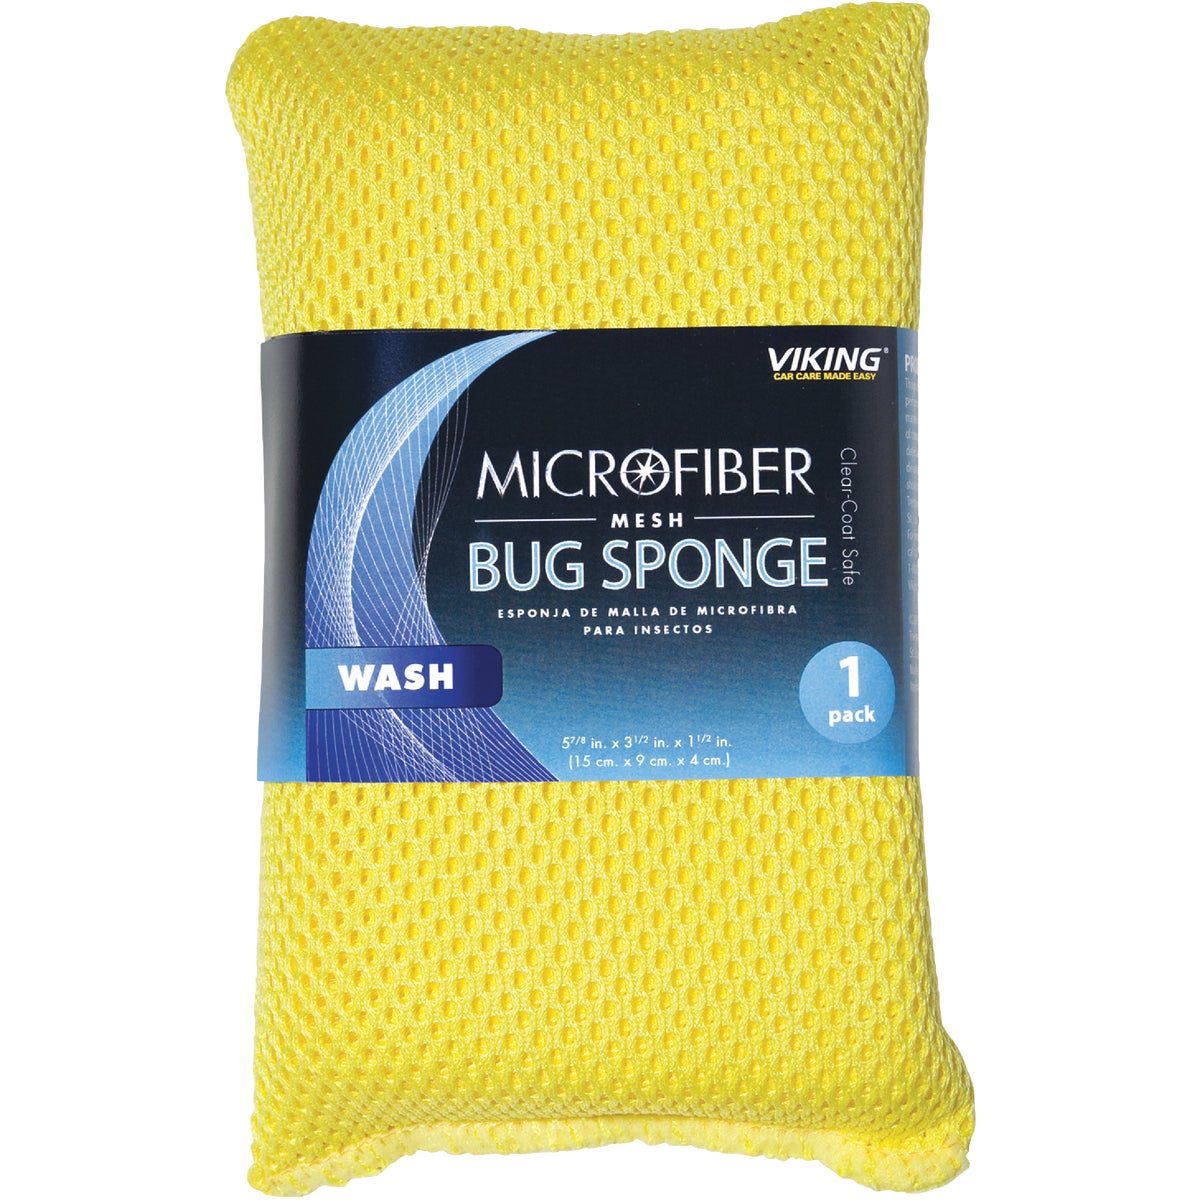 Item 588601, The unique microfiber mesh safely removes stubborn debris from glass and 